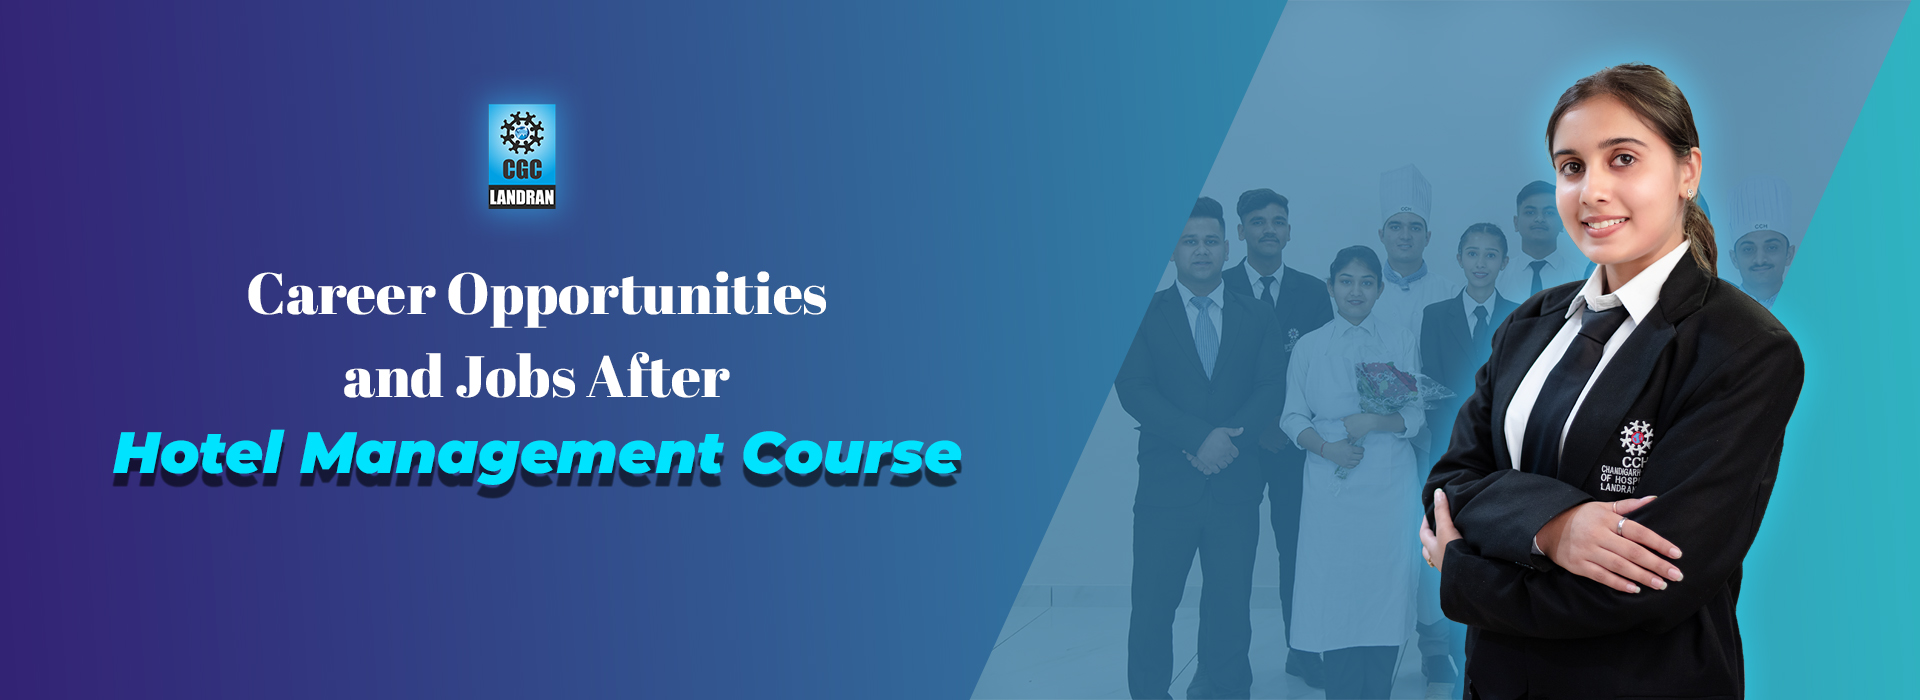 Career Opportunities and Jobs after Hotel Management Course 